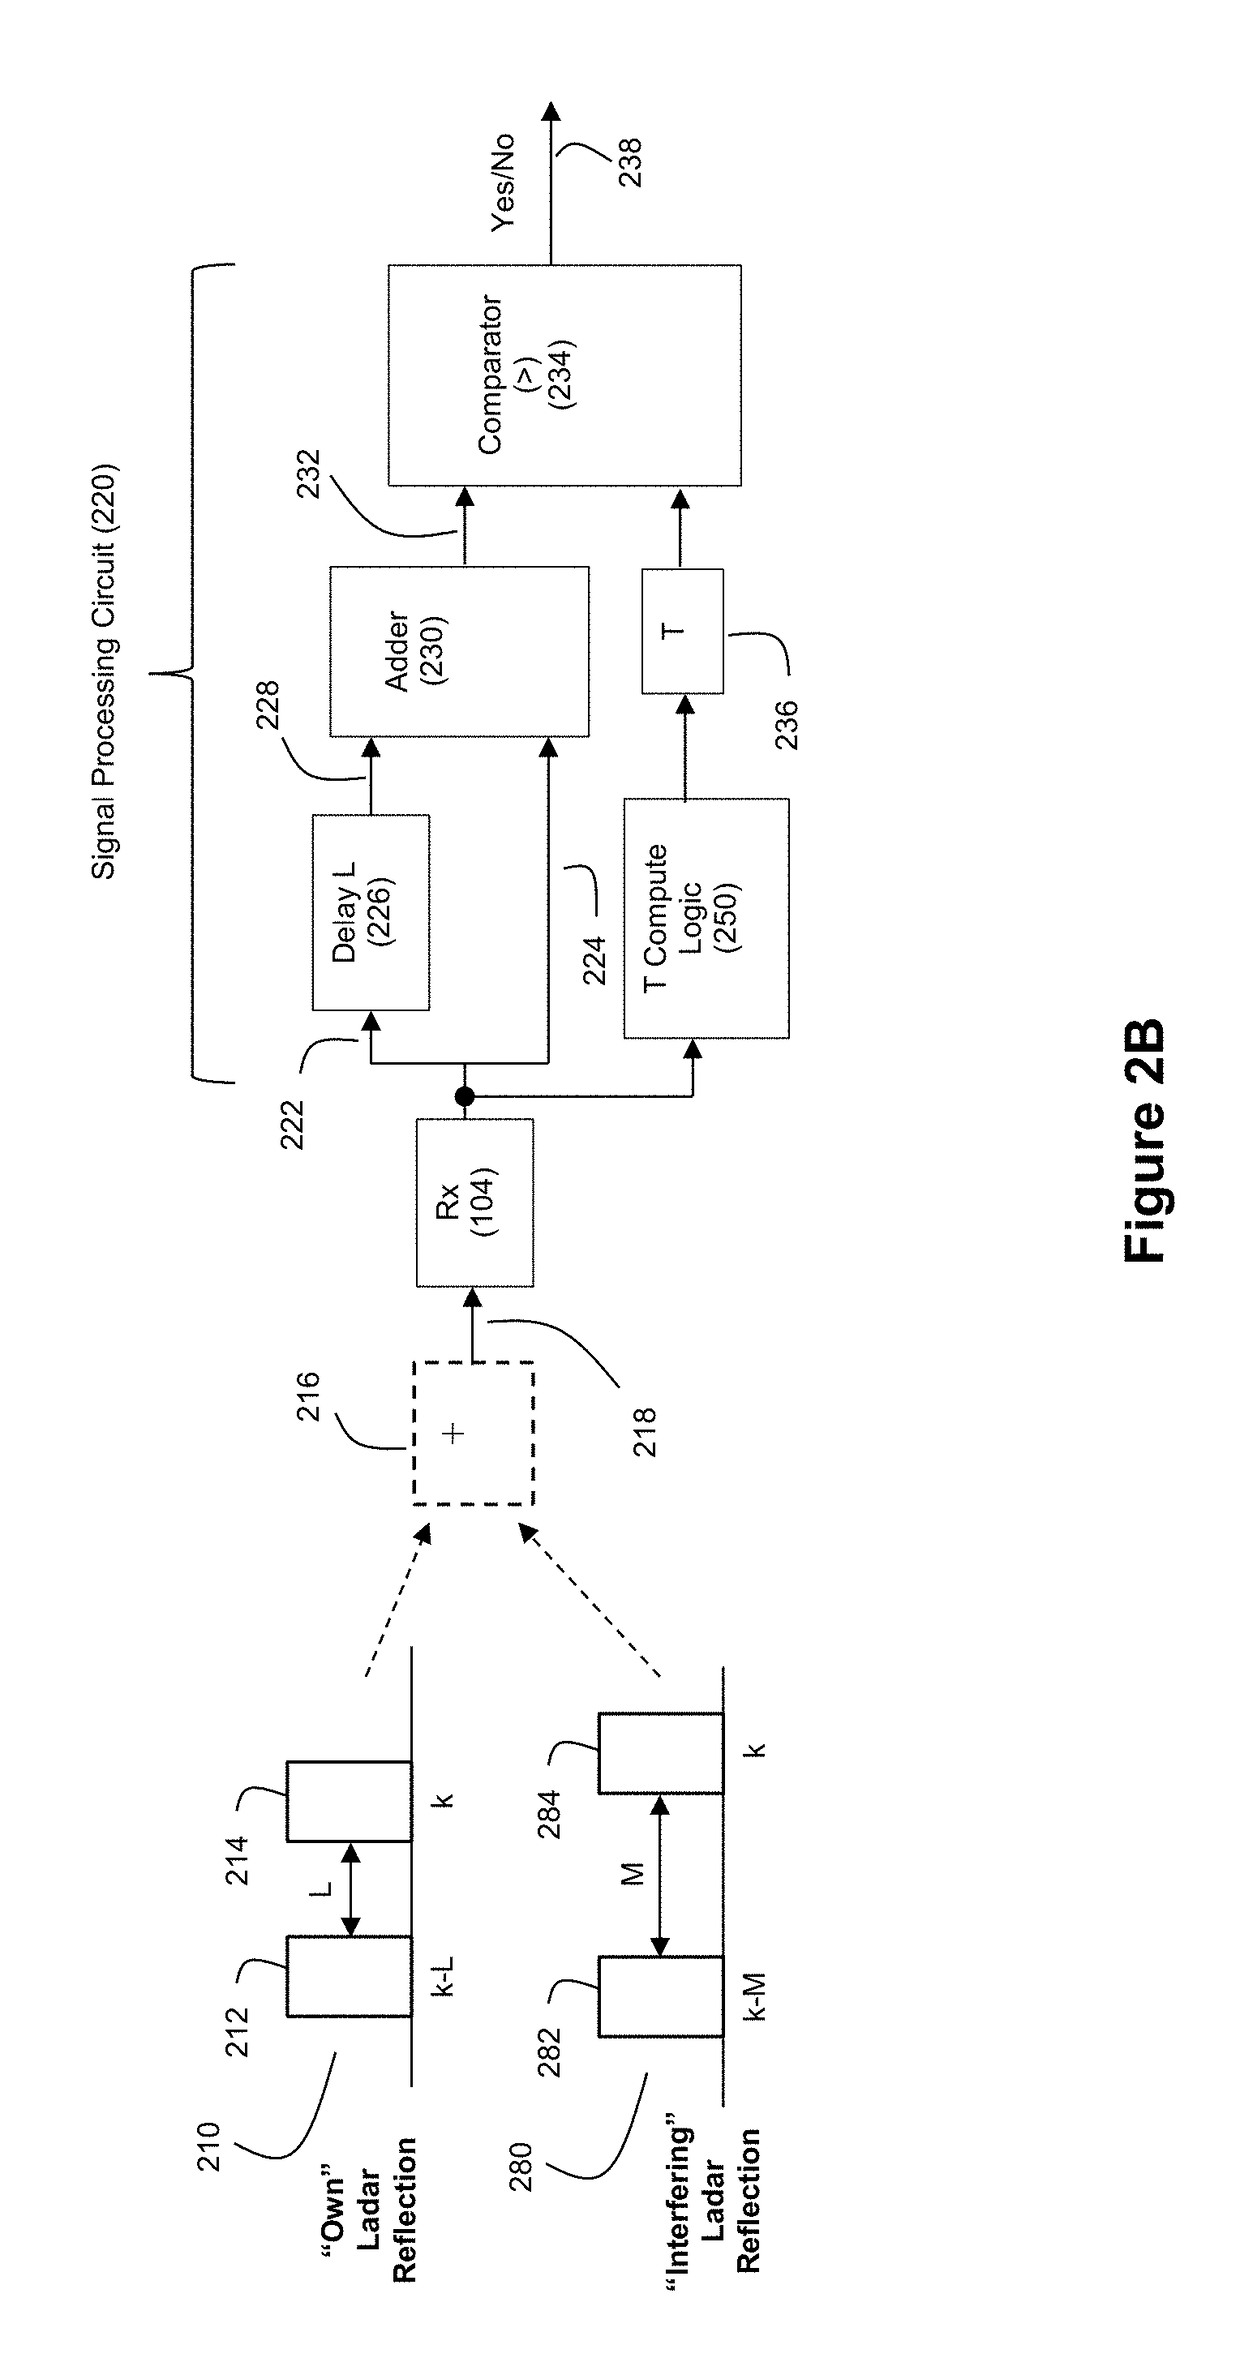 Method and system for ladar pulse deconfliction using delay code selection